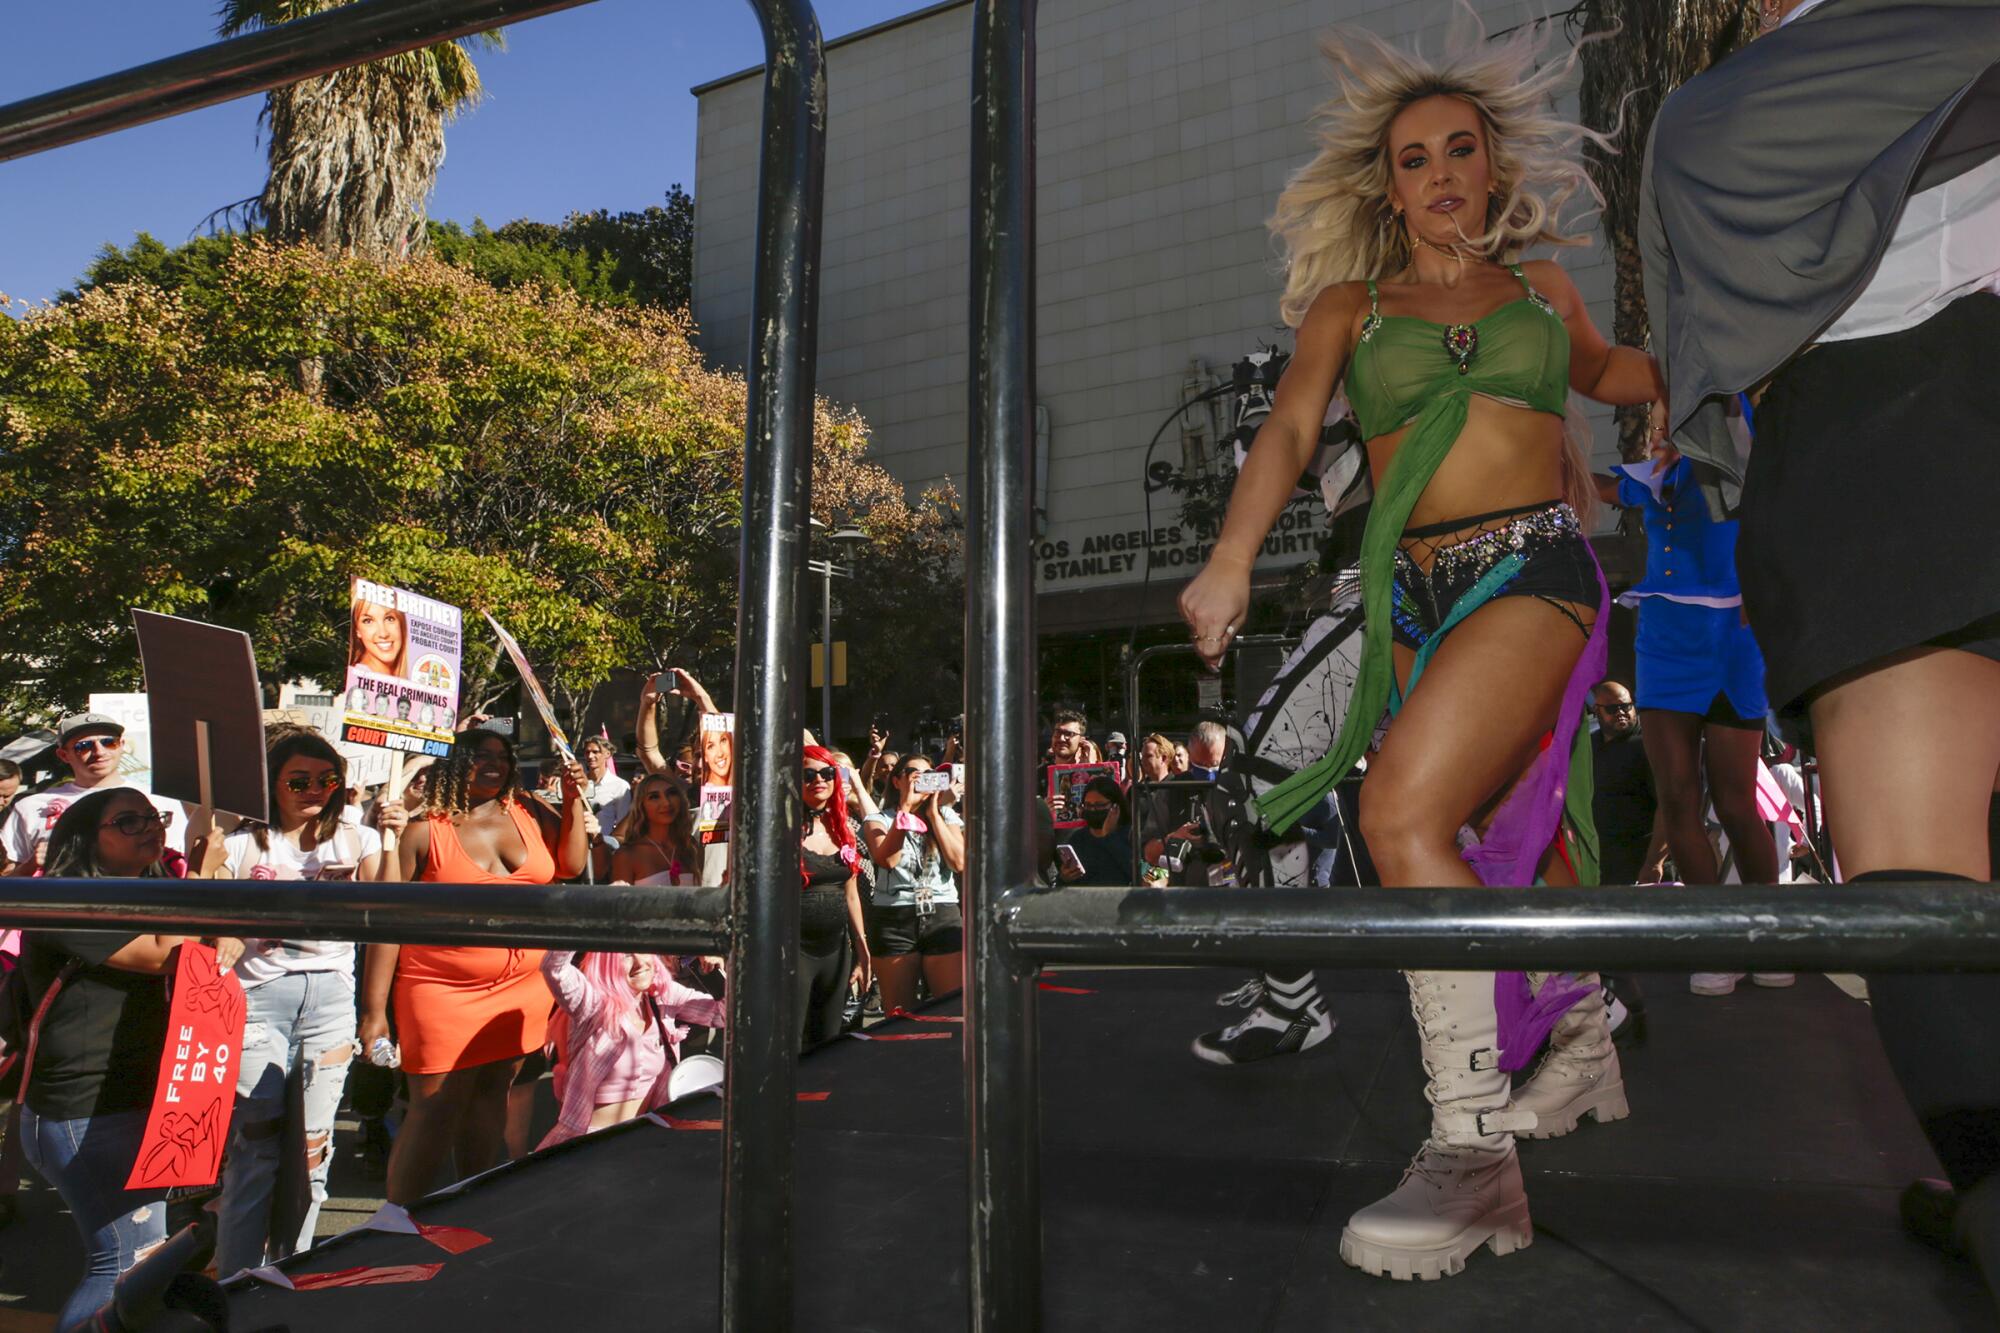 A Britney Spears impersonator dances during the rally.